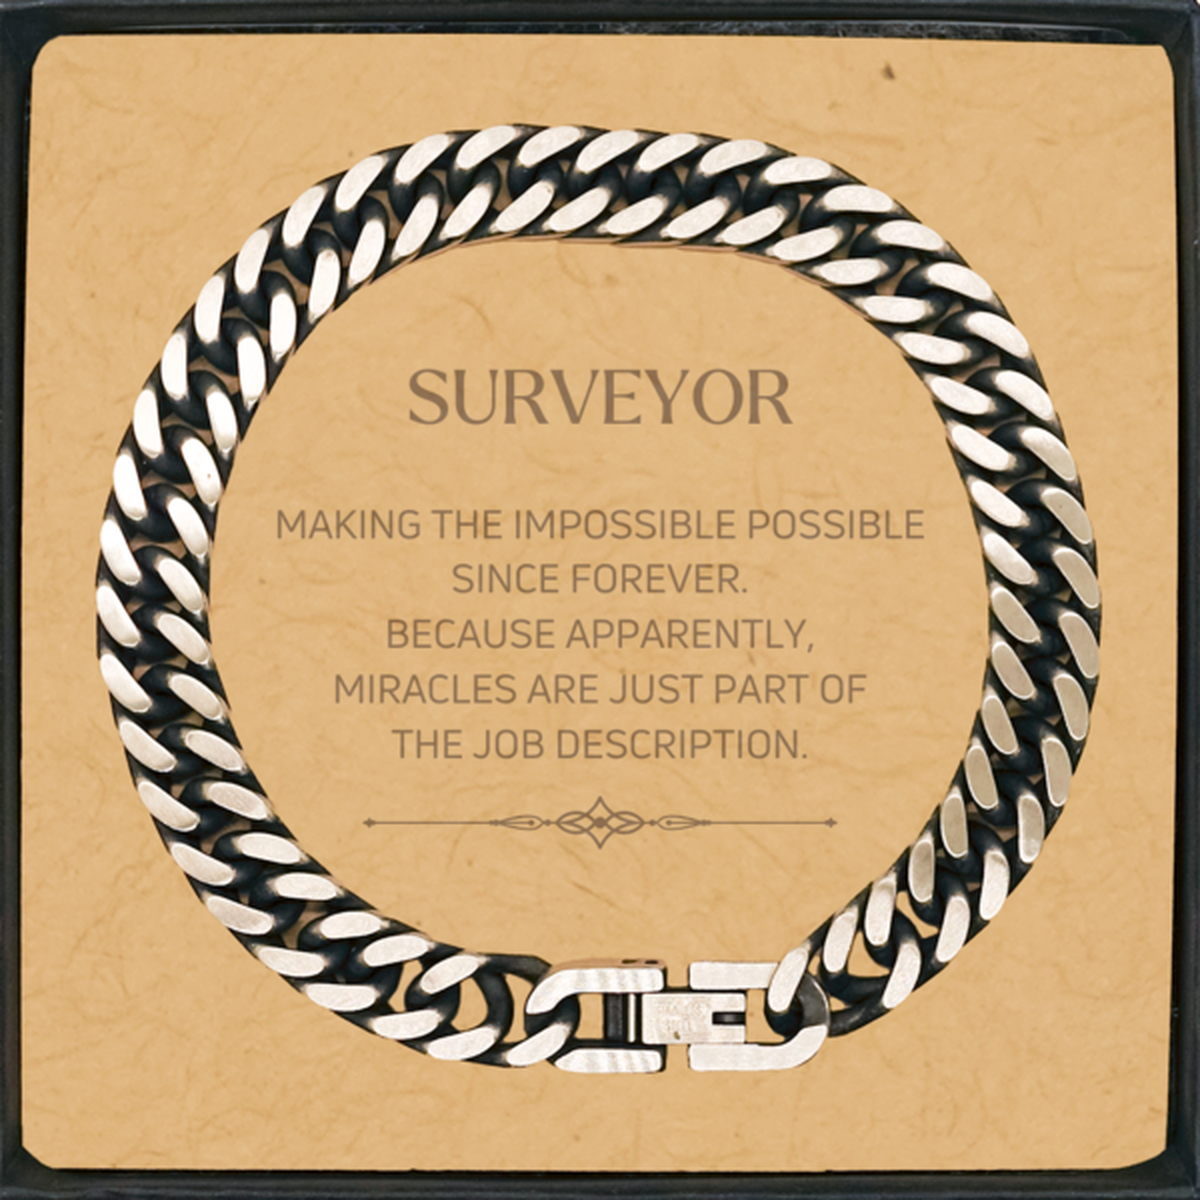 Funny Surveyor Gifts, Miracles are just part of the job description, Inspirational Birthday Cuban Link Chain Bracelet For Surveyor, Men, Women, Coworkers, Friends, Boss